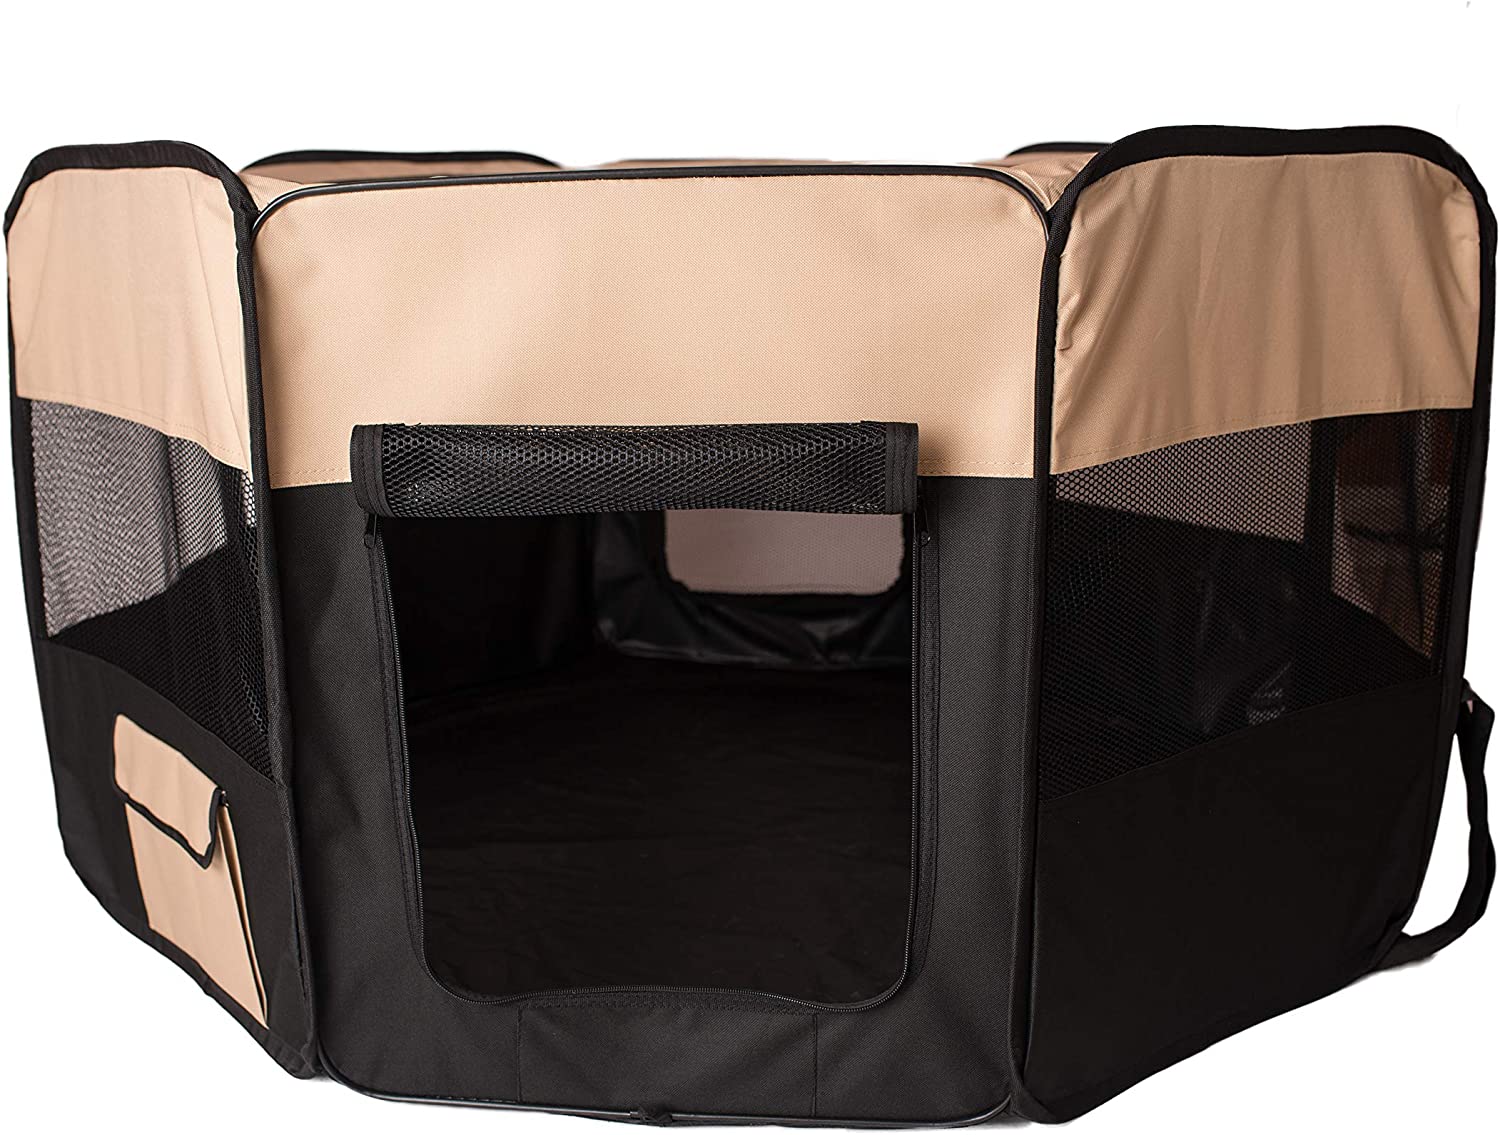 Armarkat Model PP003BGE-XL Portable Pet Playpen in Black and Beige Combo, Extra Large